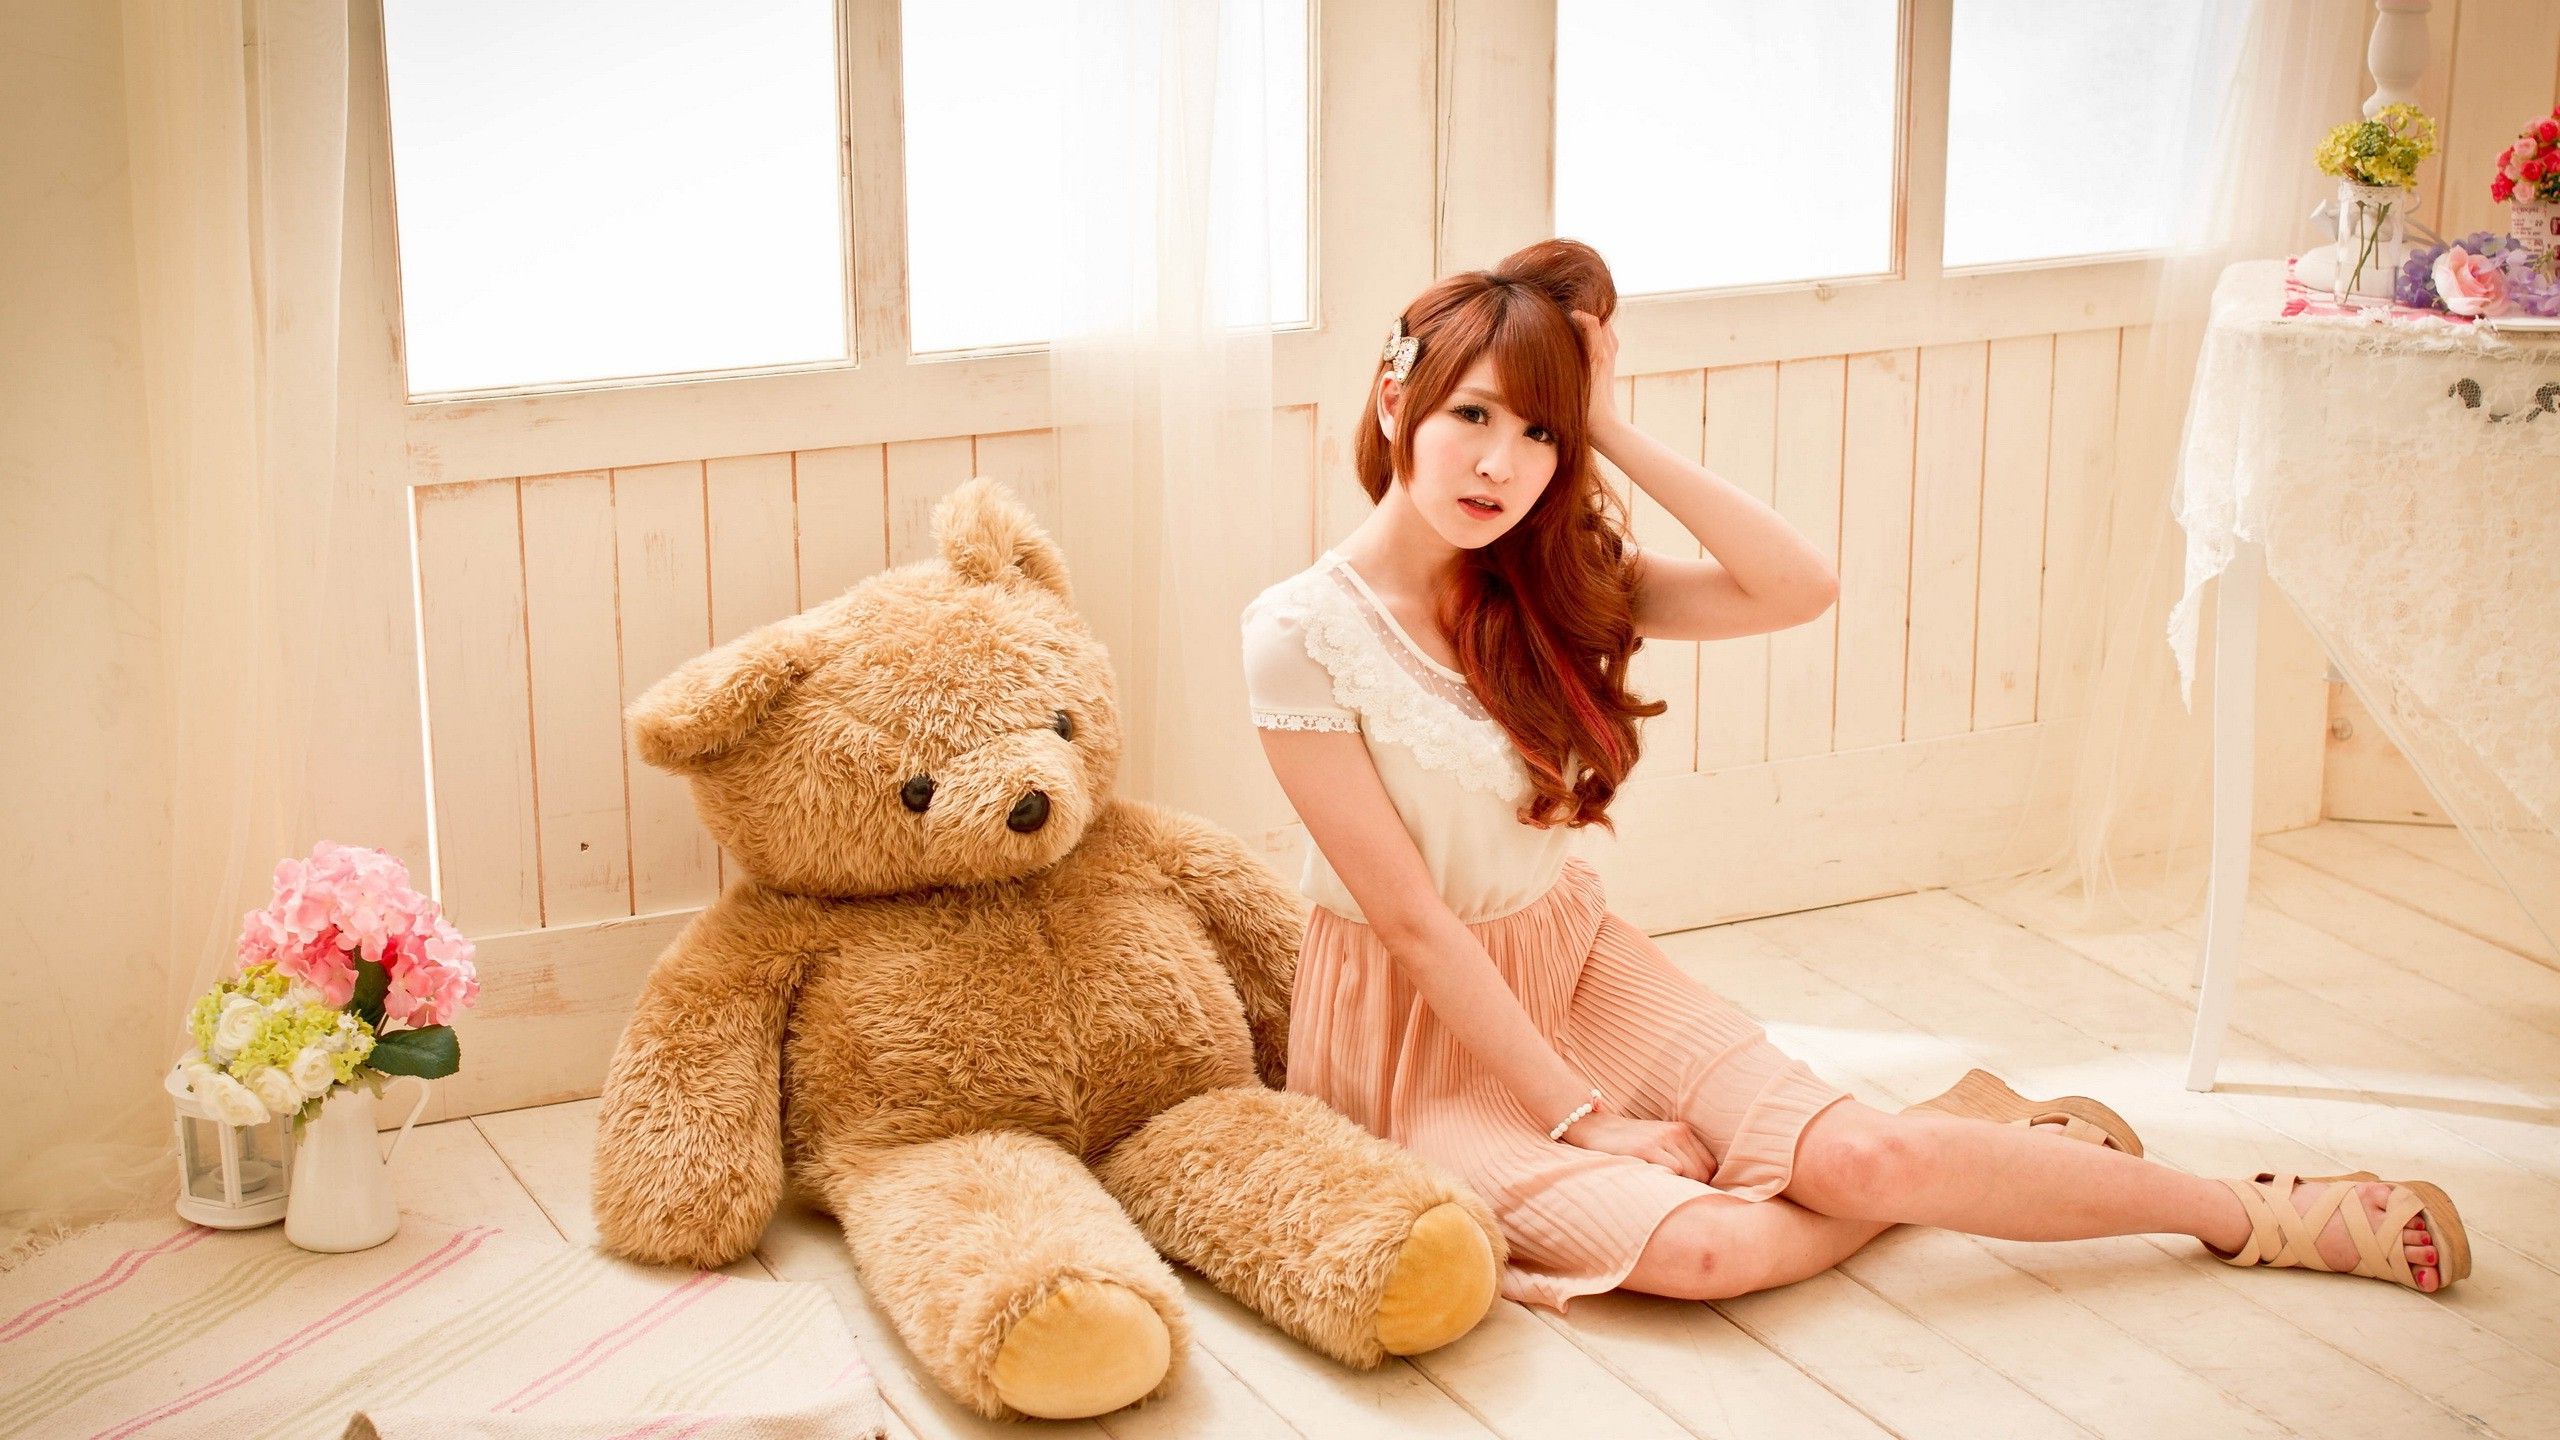 Girl With Teddy Bear Wallpaper - Happiness In The New Year - HD Wallpaper 